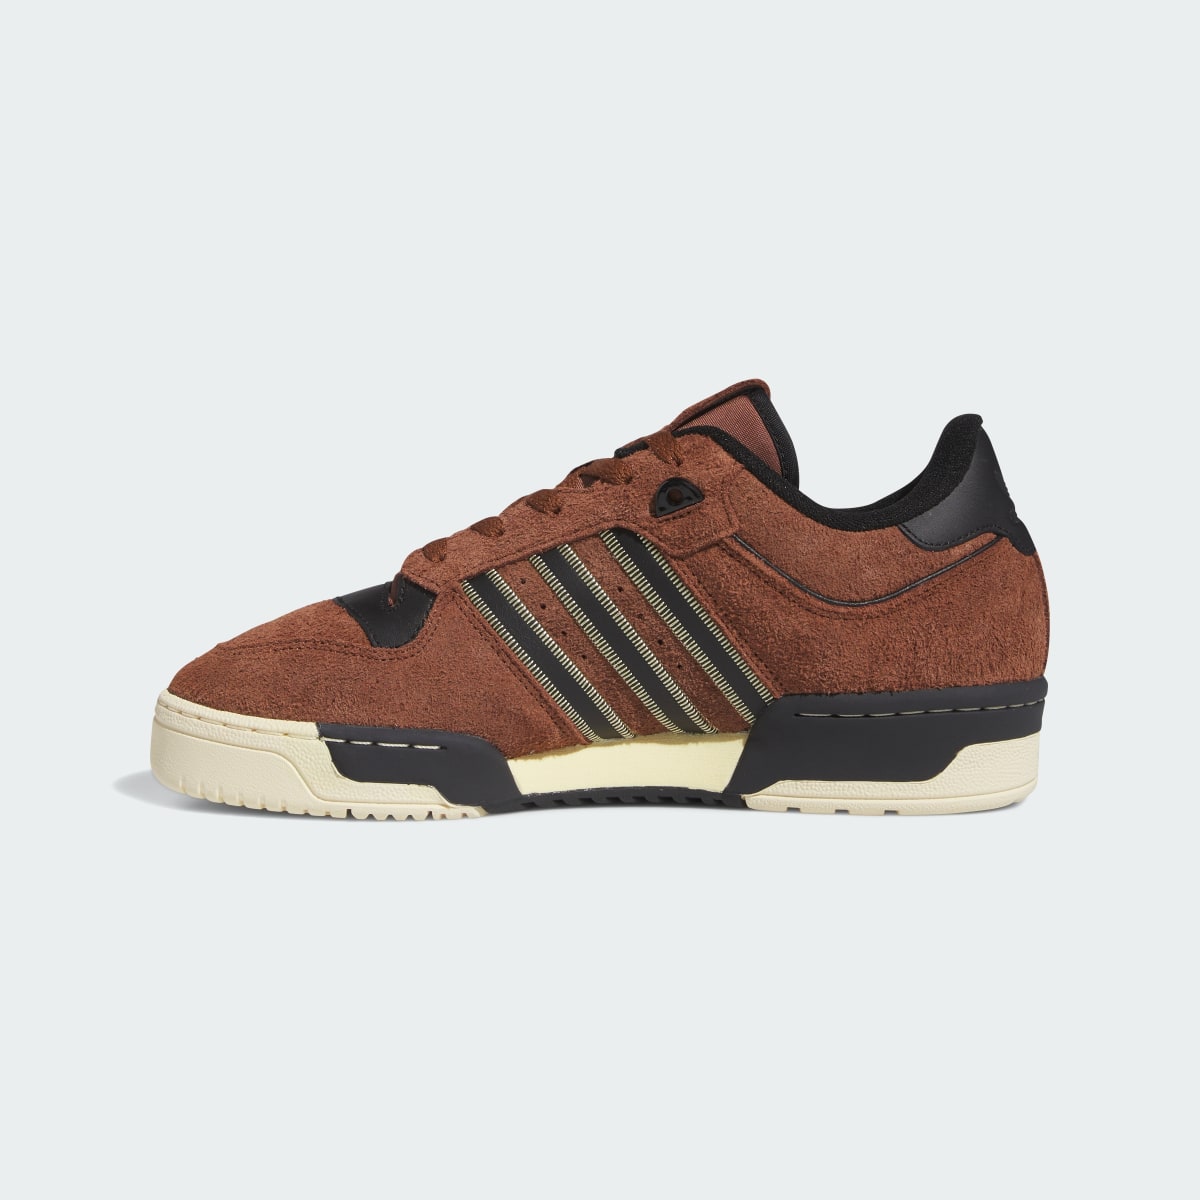 Adidas Rivalry 86 Low Schuh. 7